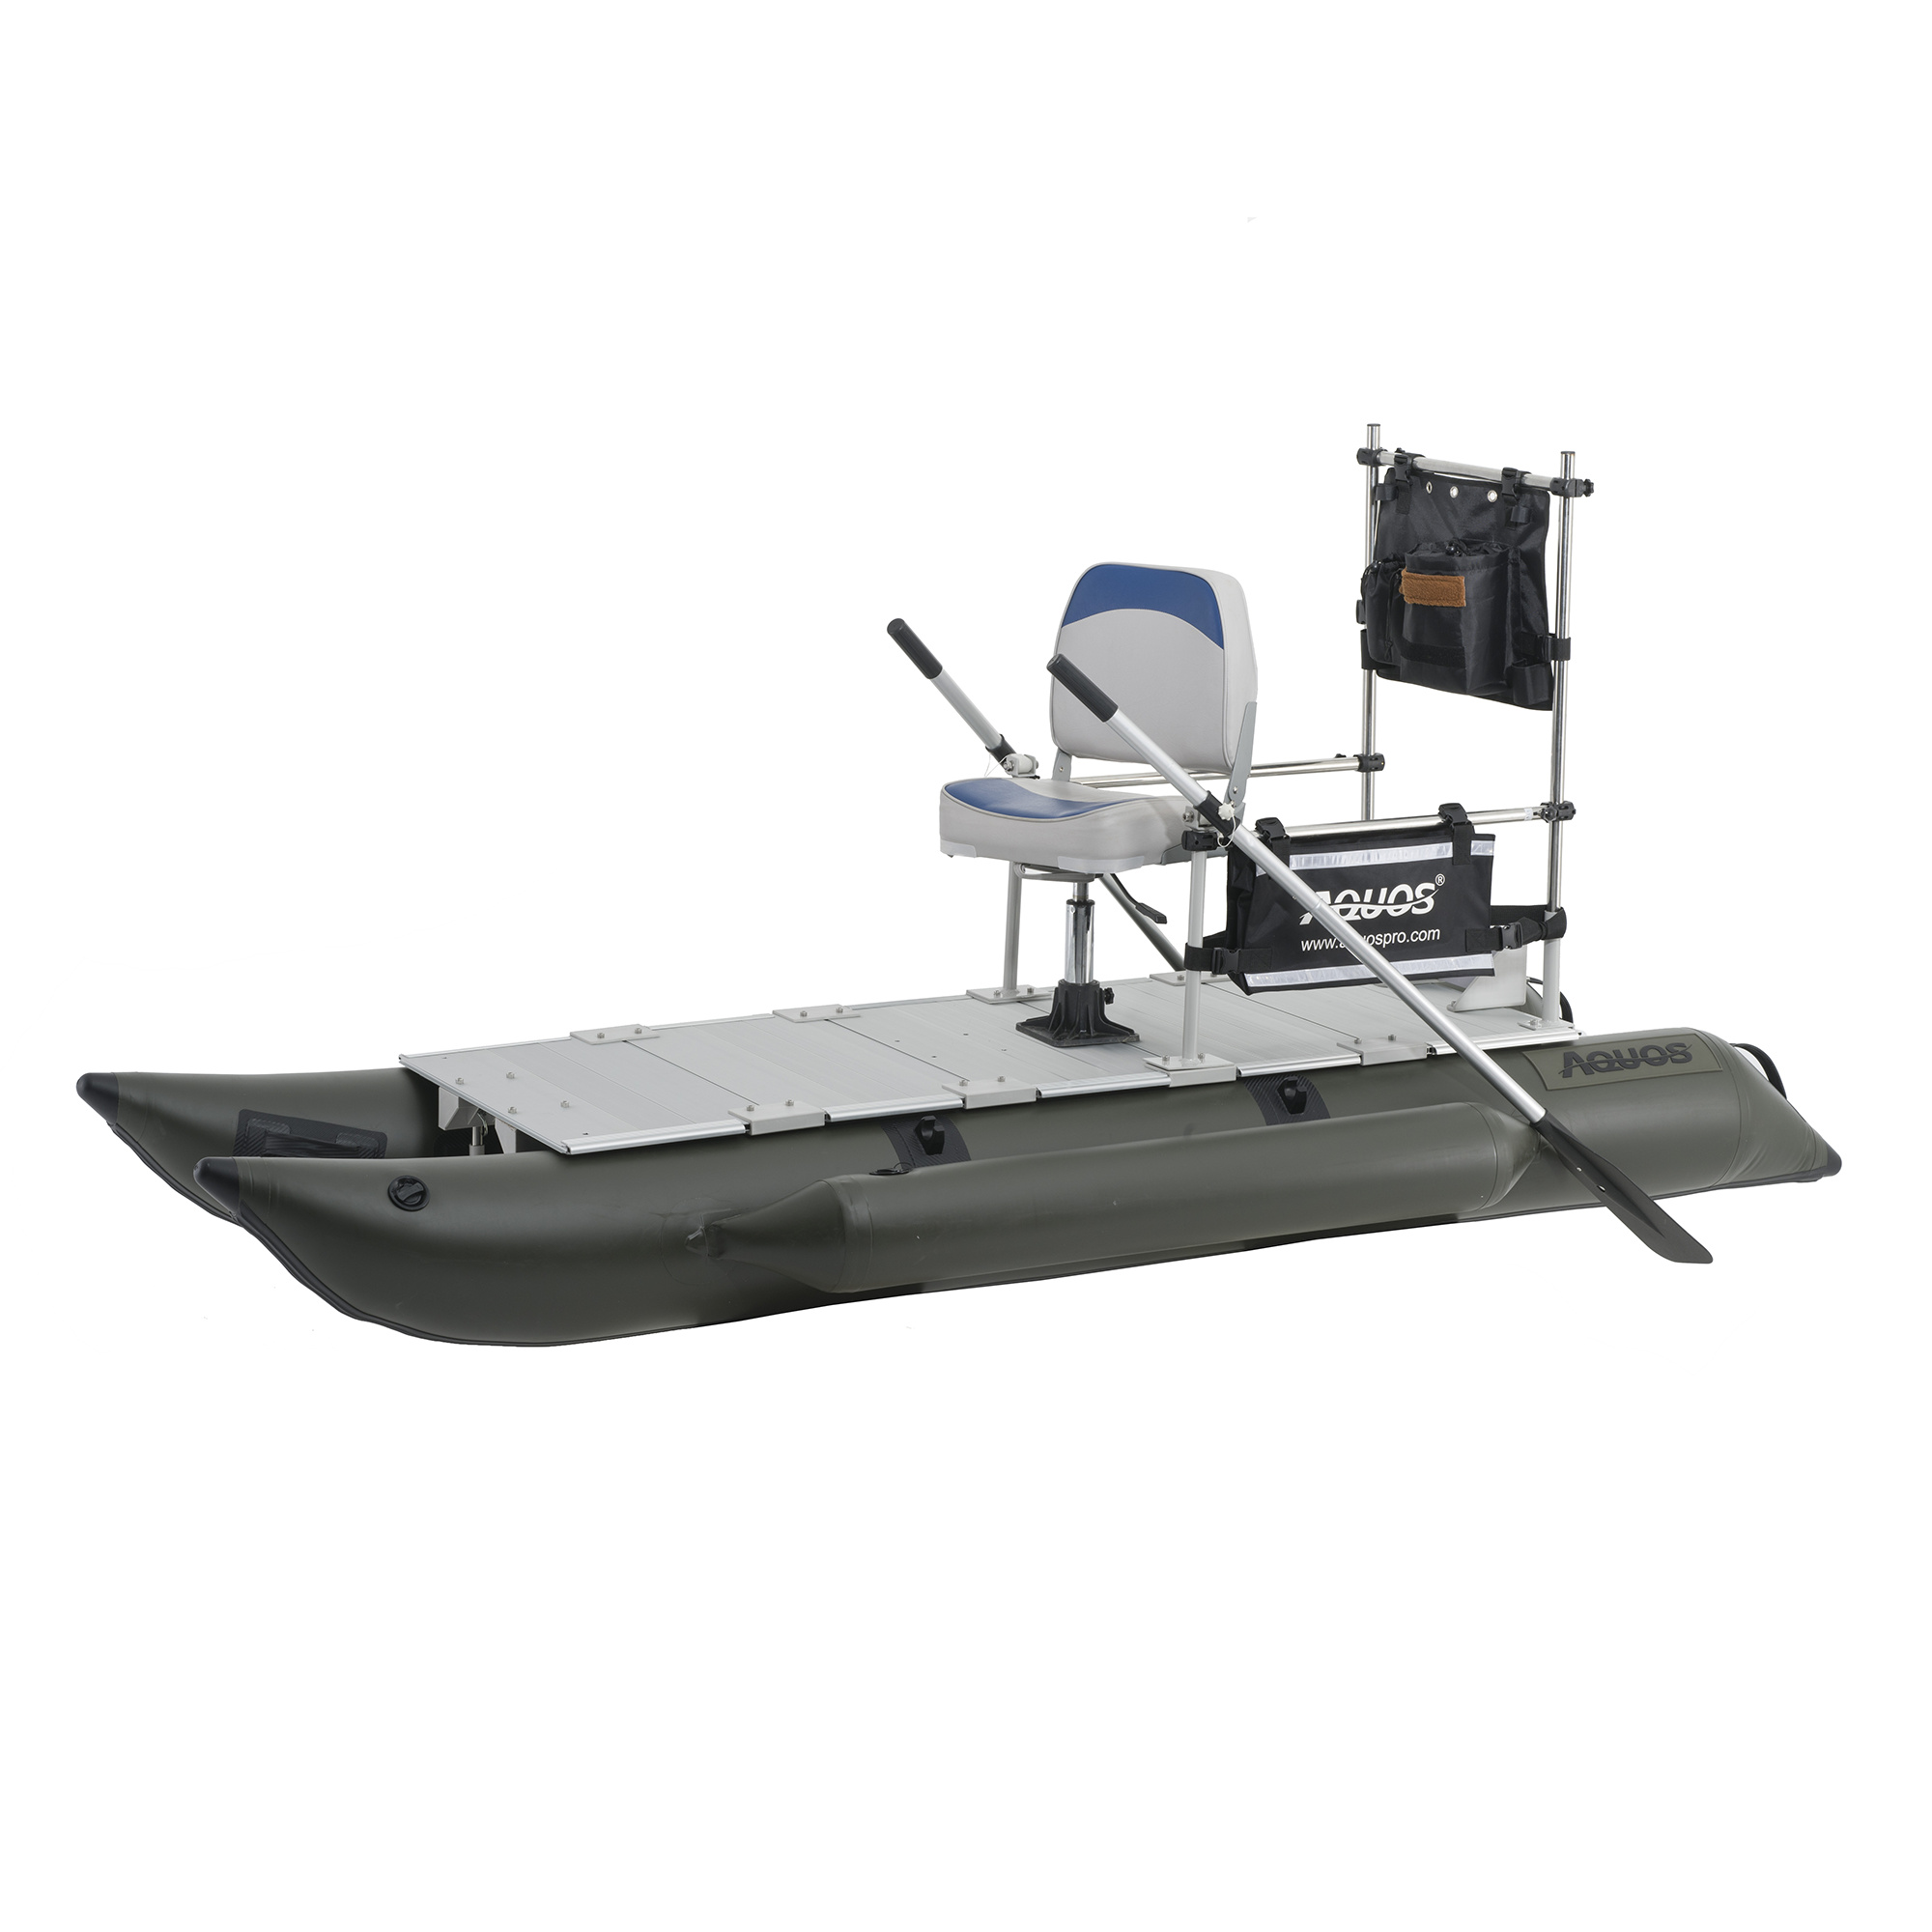 Skiff: Aquos Backpack Series 7.5FT, A portable pontoon boat, Weighs 52 lbs. 2000x2000 HD Background.